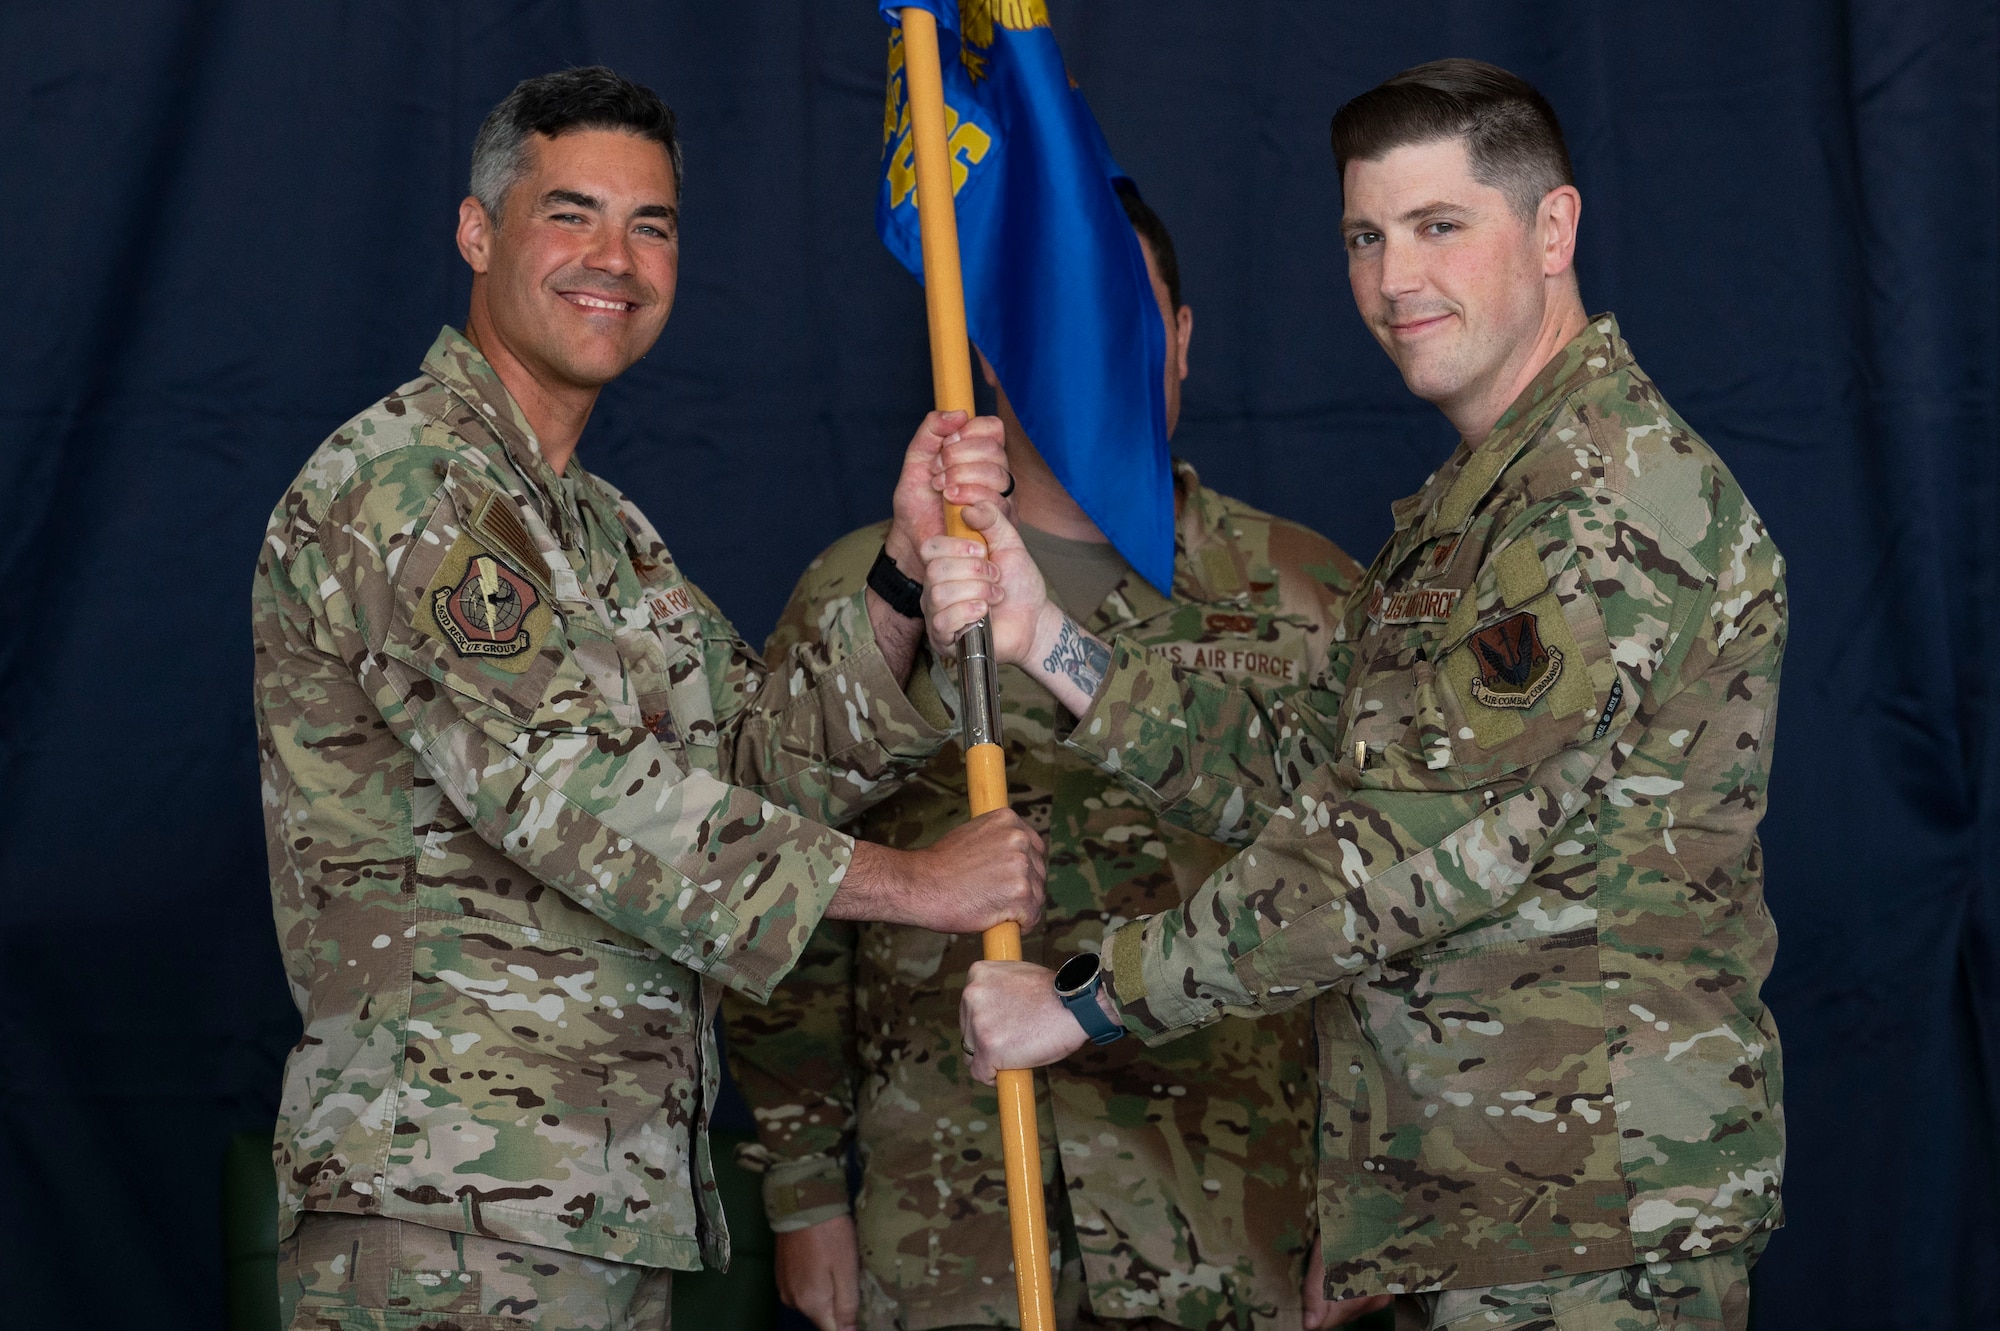 Pictured above are two people holding a flag.